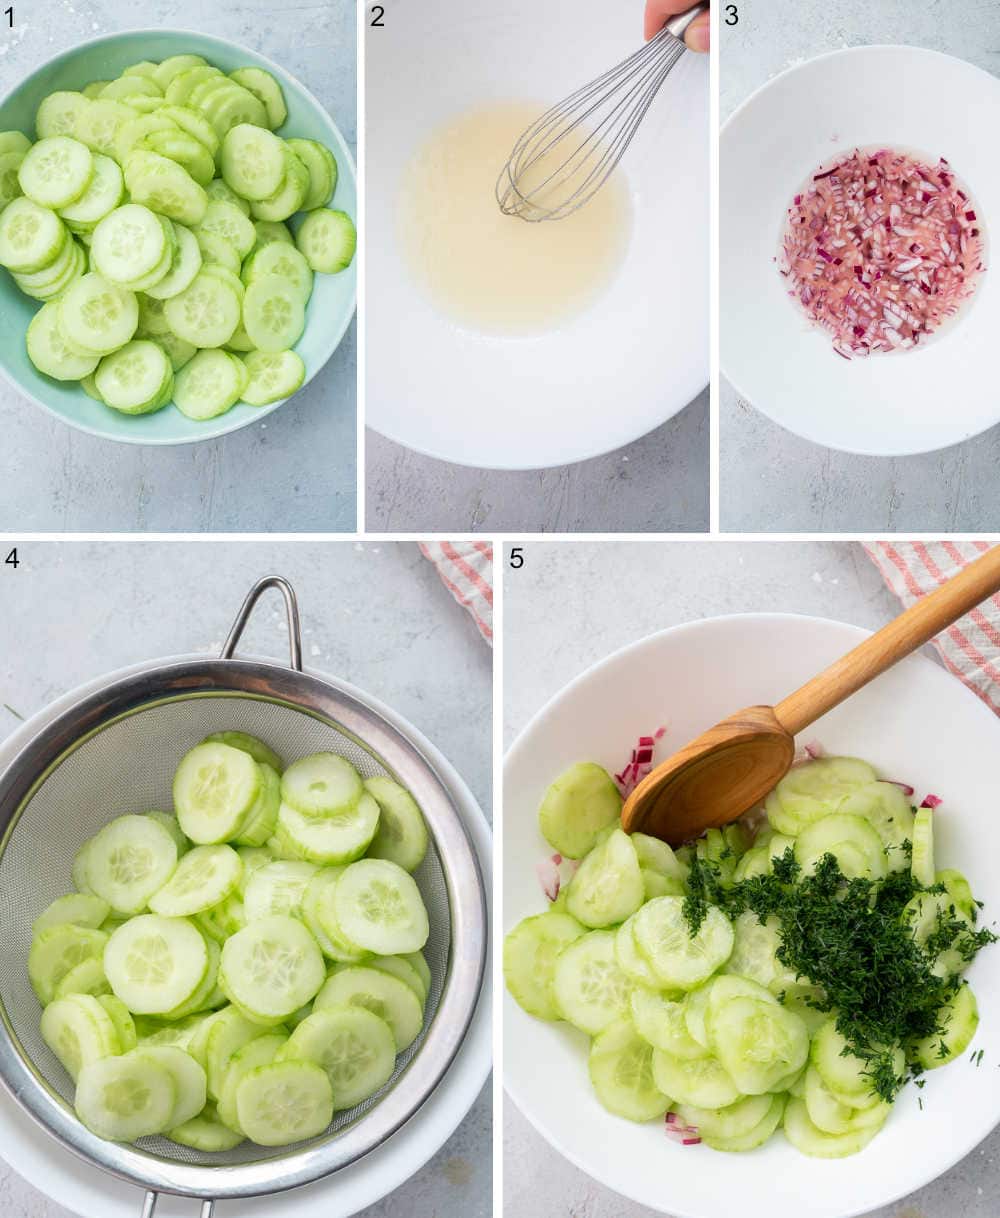 A collage of 5 photos showing how to make German cucumber salad step by step.